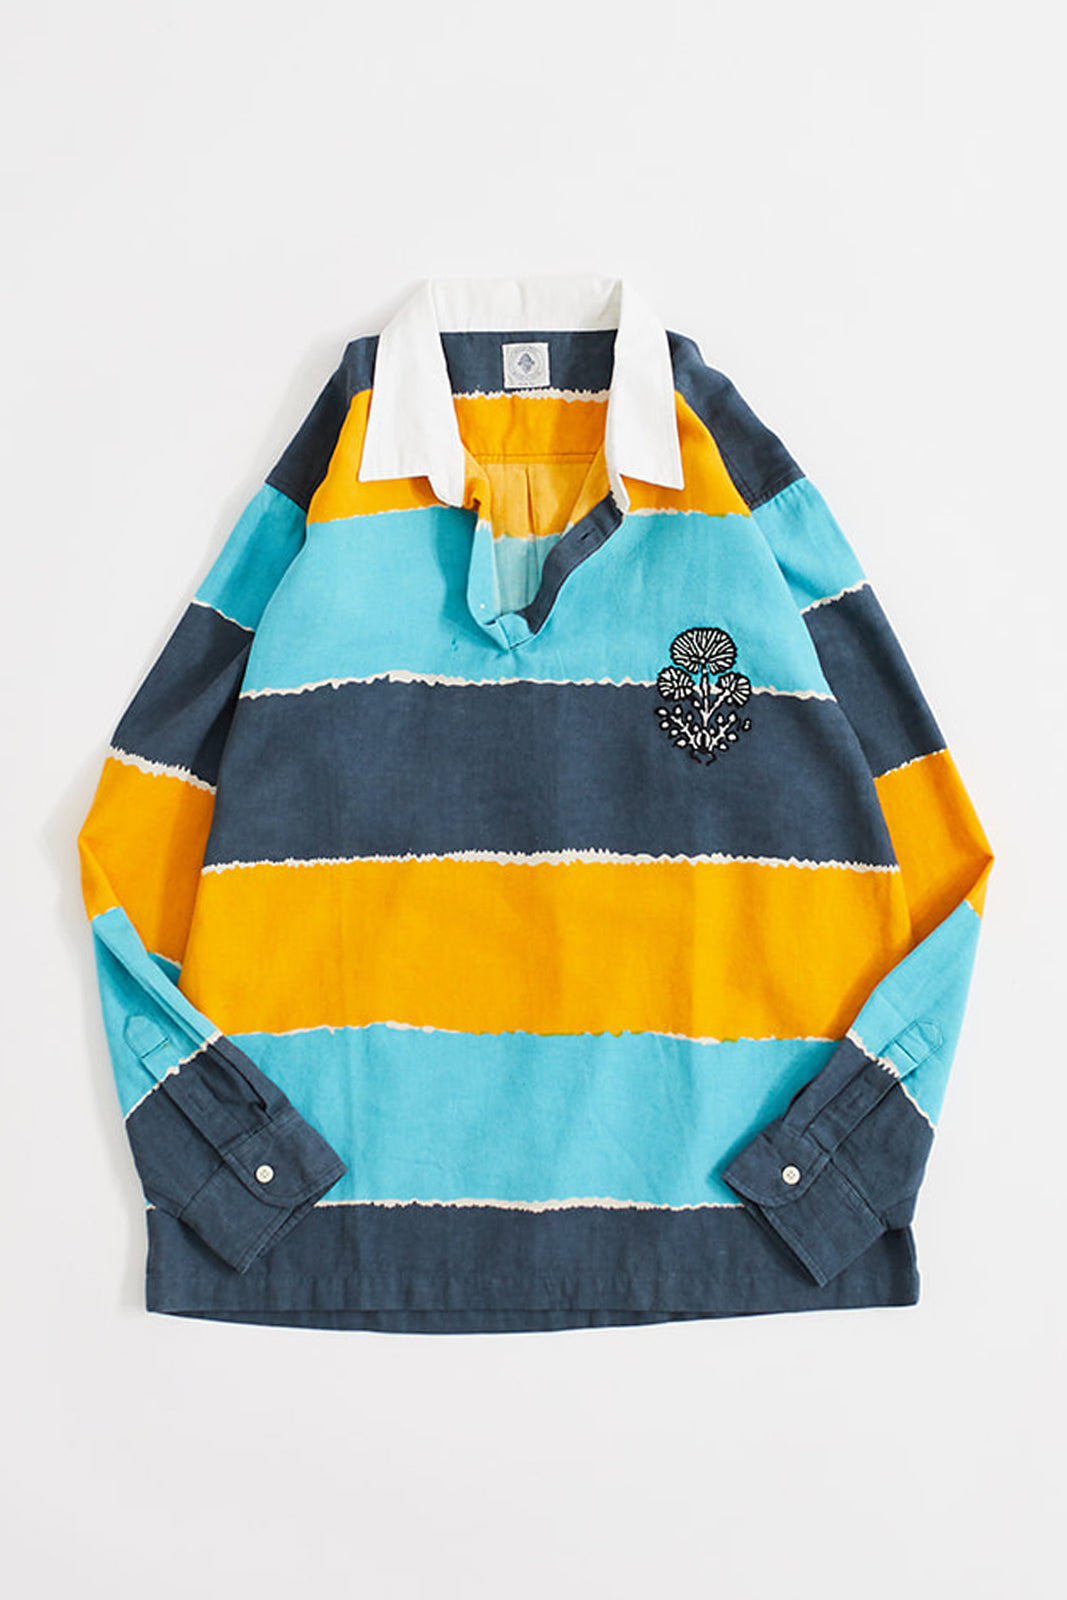 LEE BLOCK PRINTED RUGBY - OLD GOLD/AQUA/CHARCOAL OXFORD